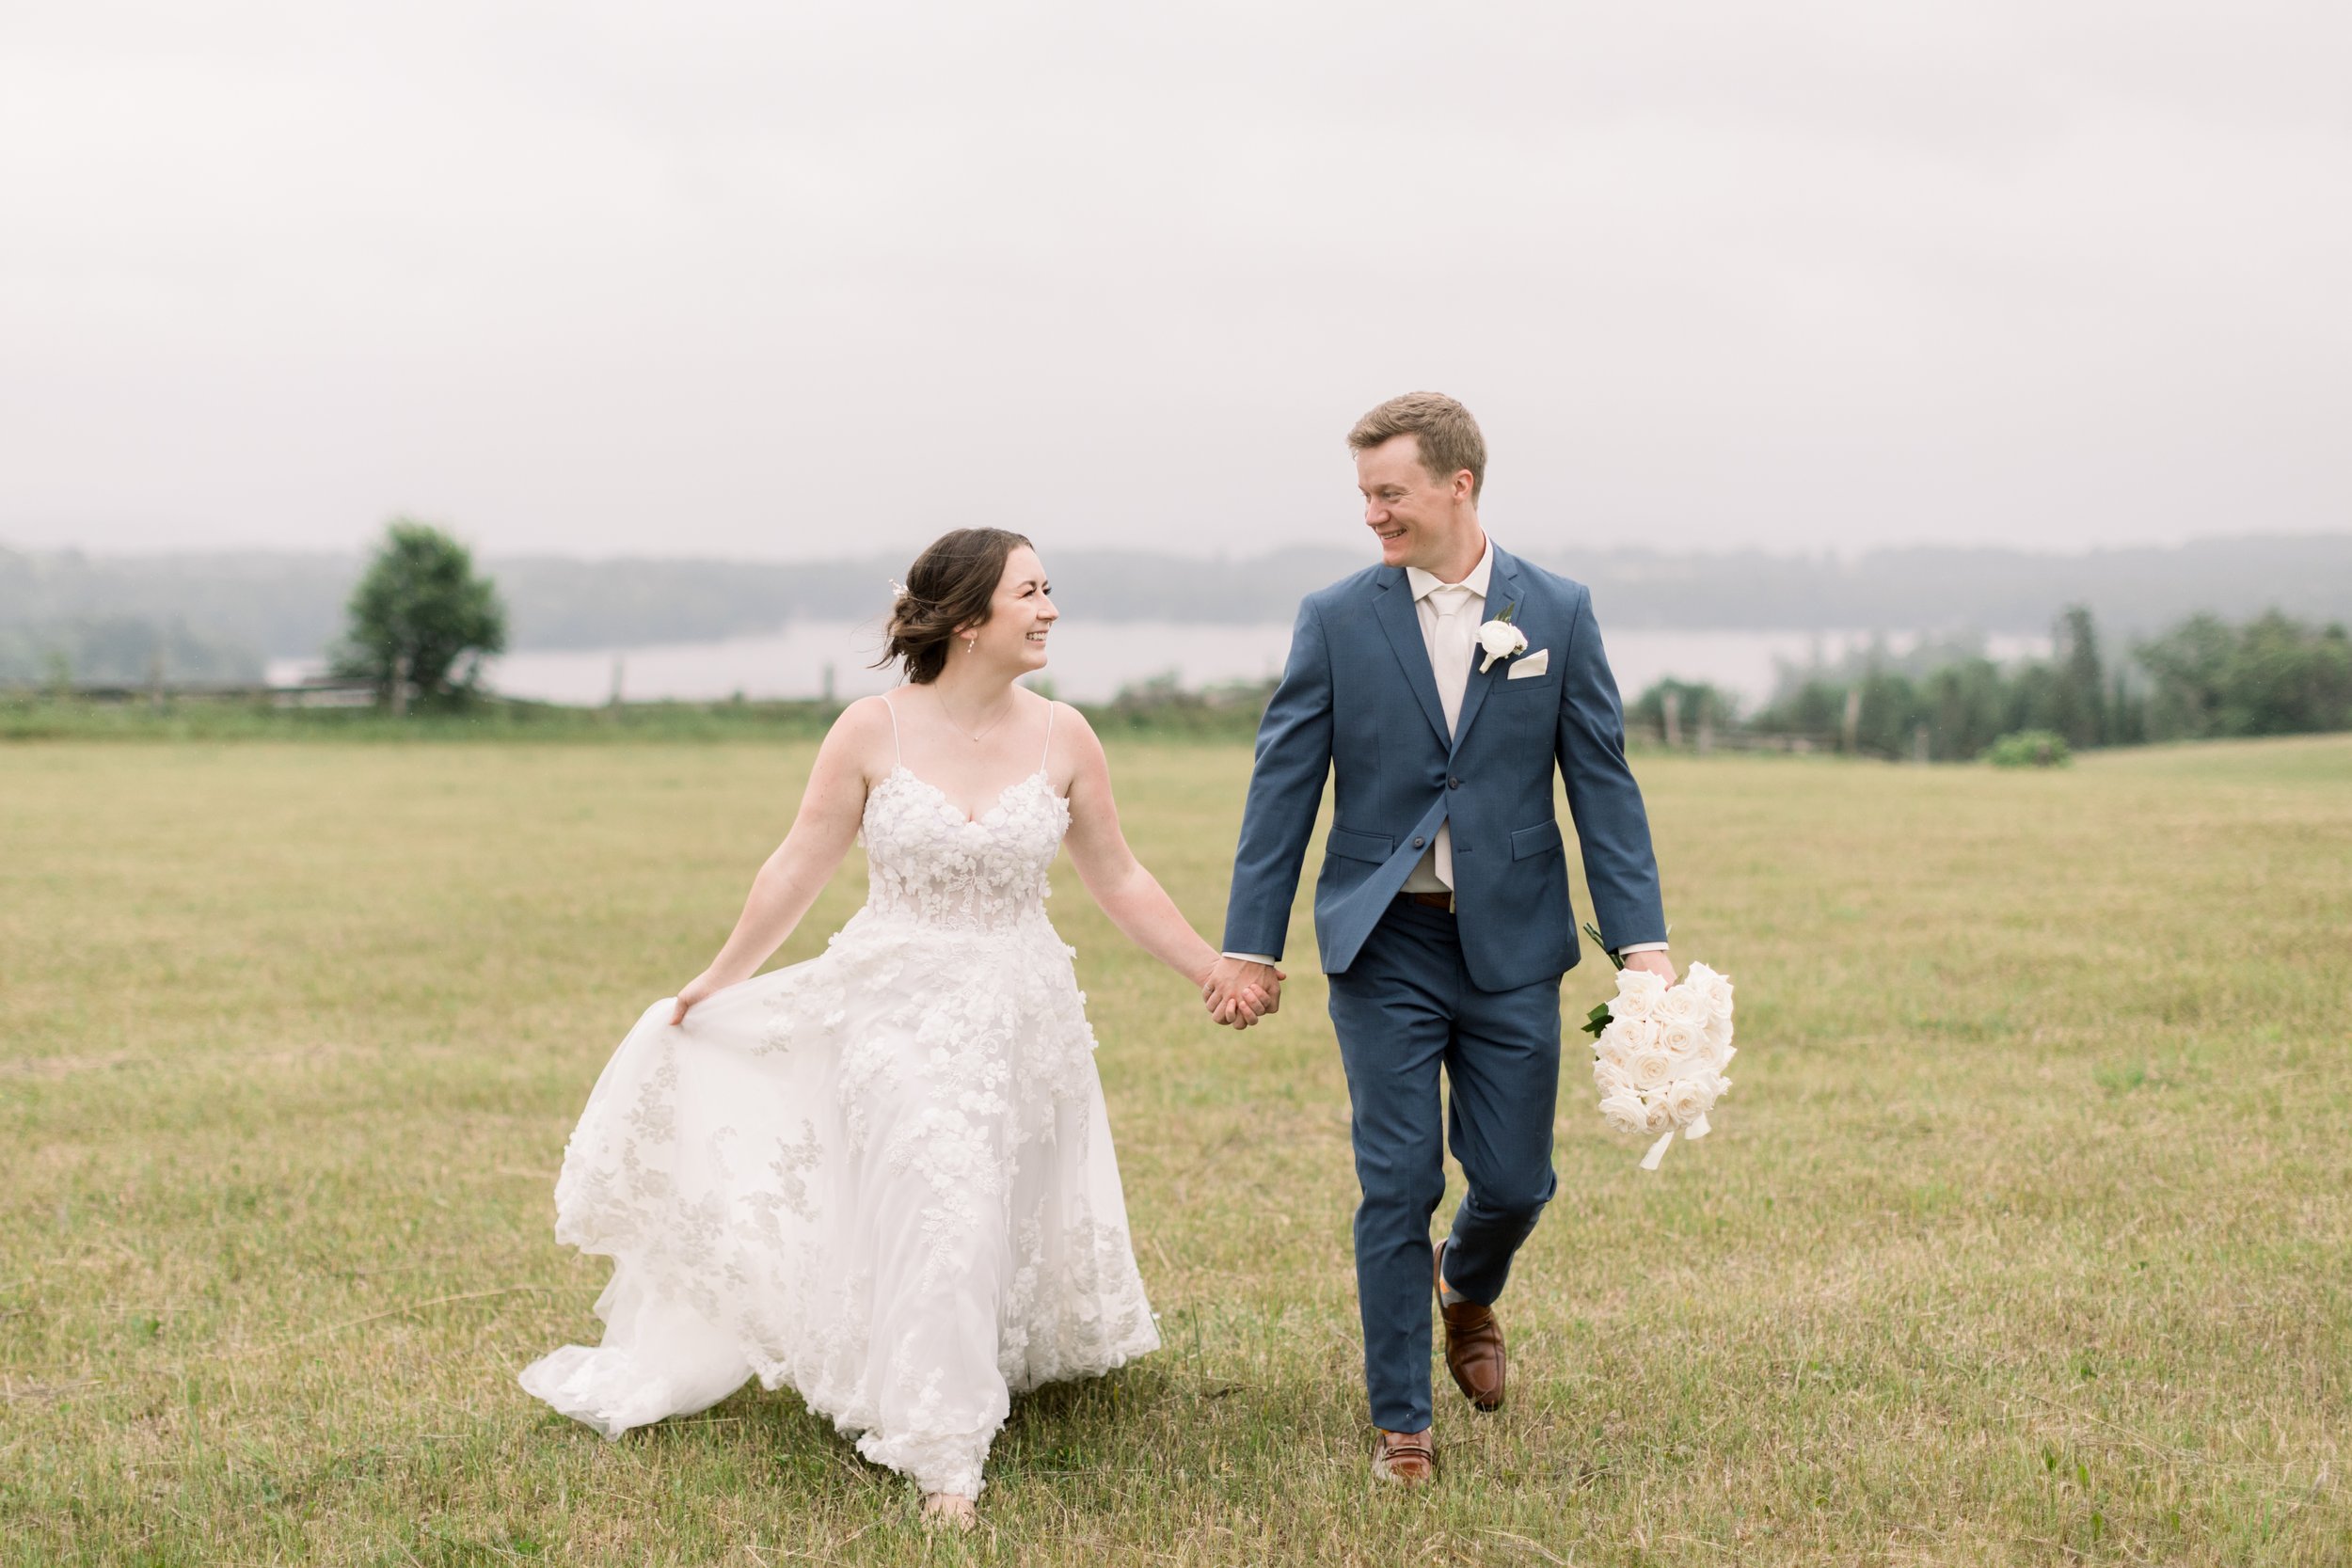  Newlyweds walking hand in hand in front of a lake captured by Chelsea Mason Photography Ontario wedding photographer. lace wedding dress #chelseamasonphotography #chelseamasonweddings #Ontarioweddings #Boulterweddingphotographer #laceweddinggown 